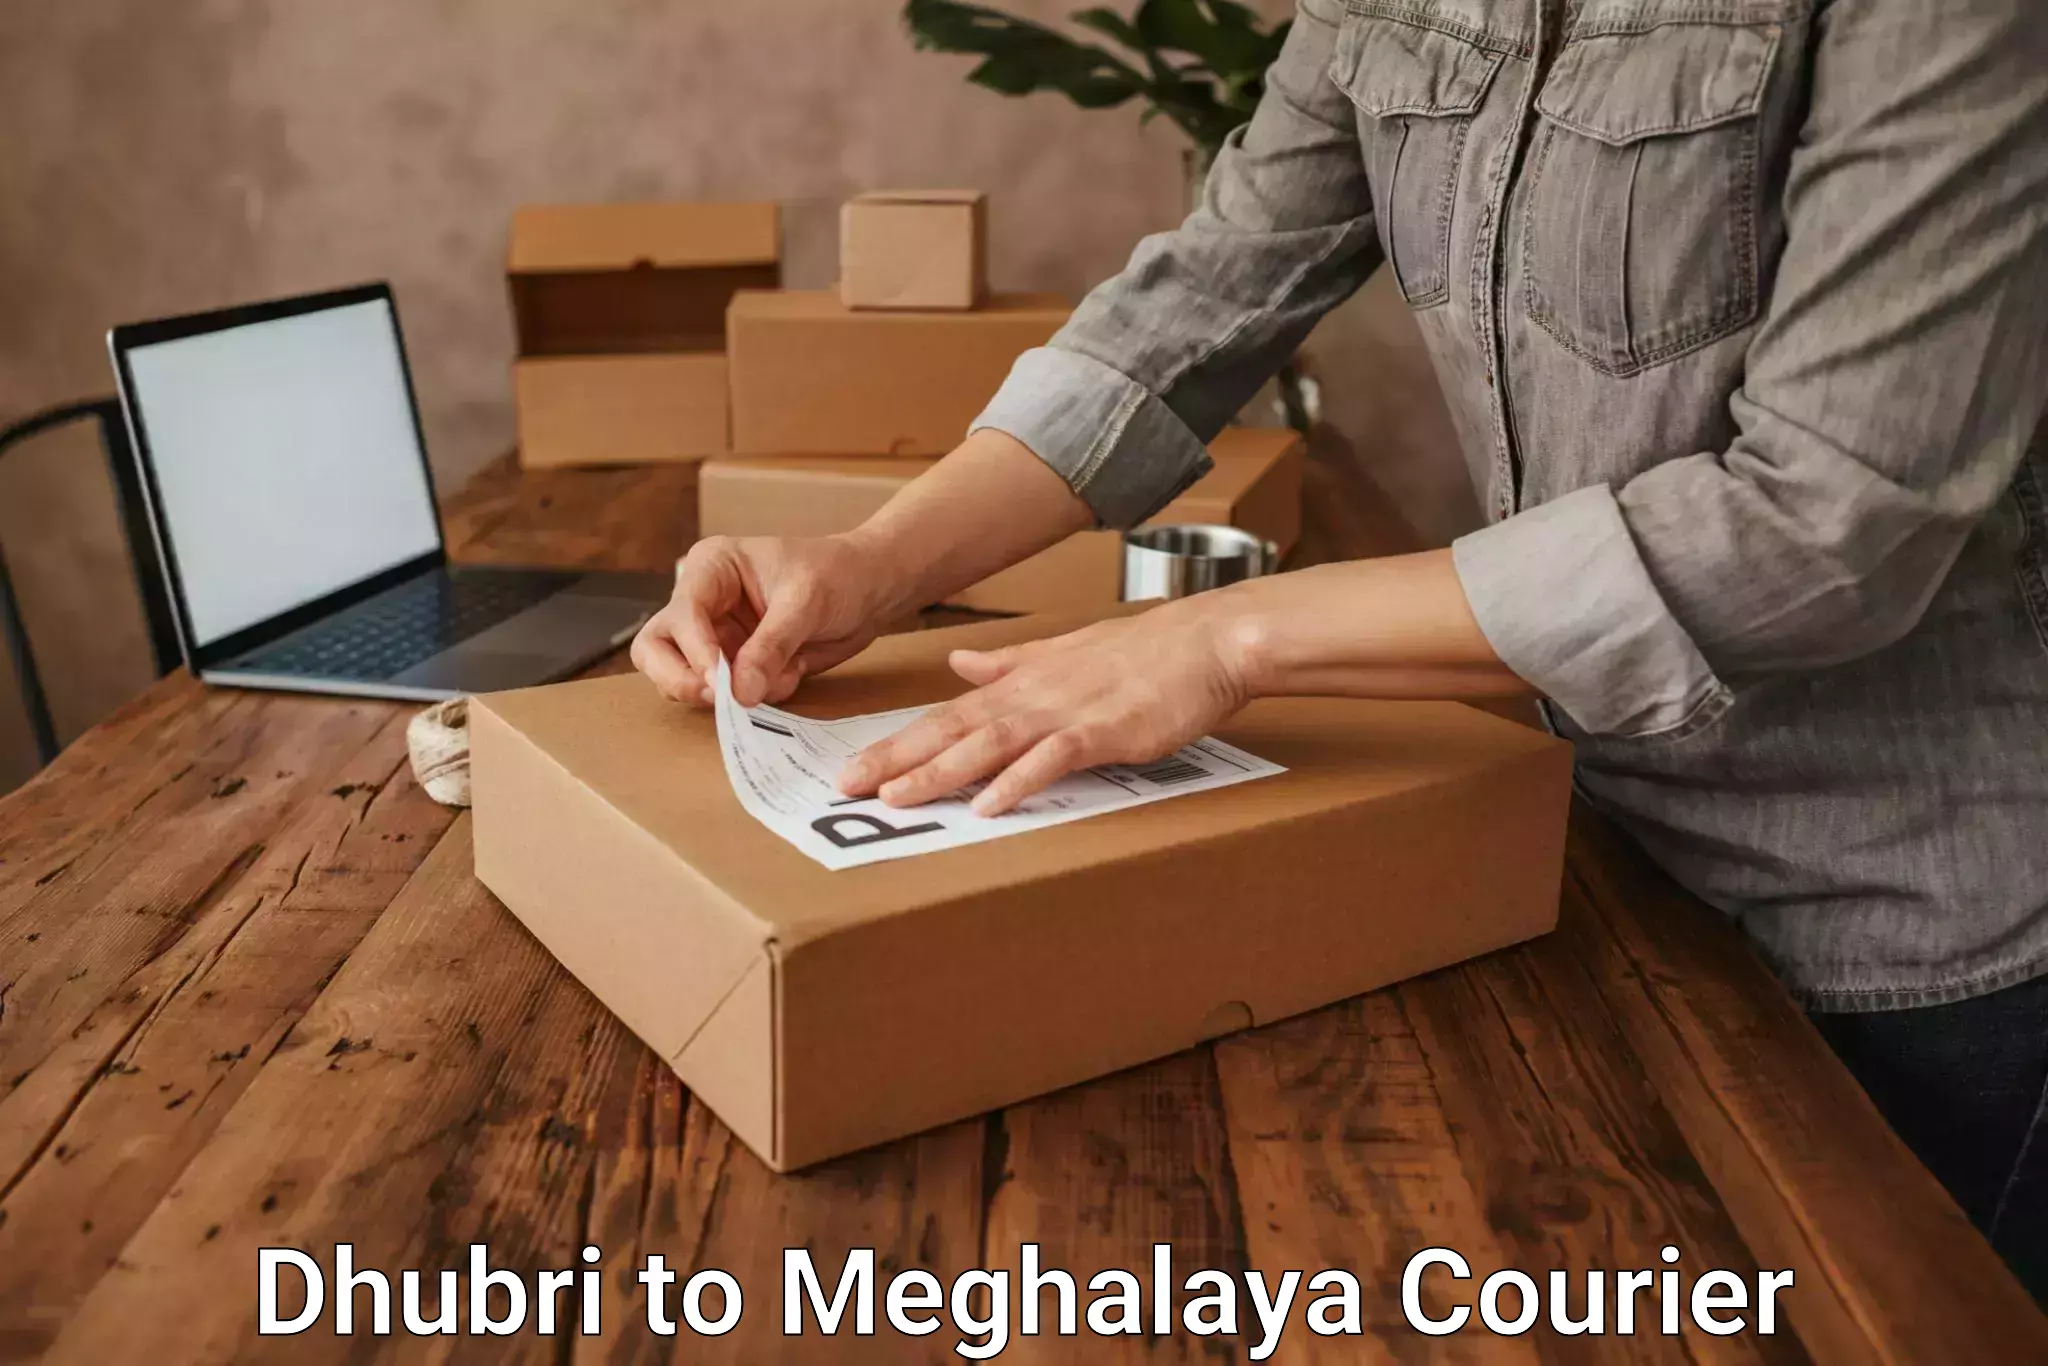 Professional courier handling Dhubri to Nongpoh